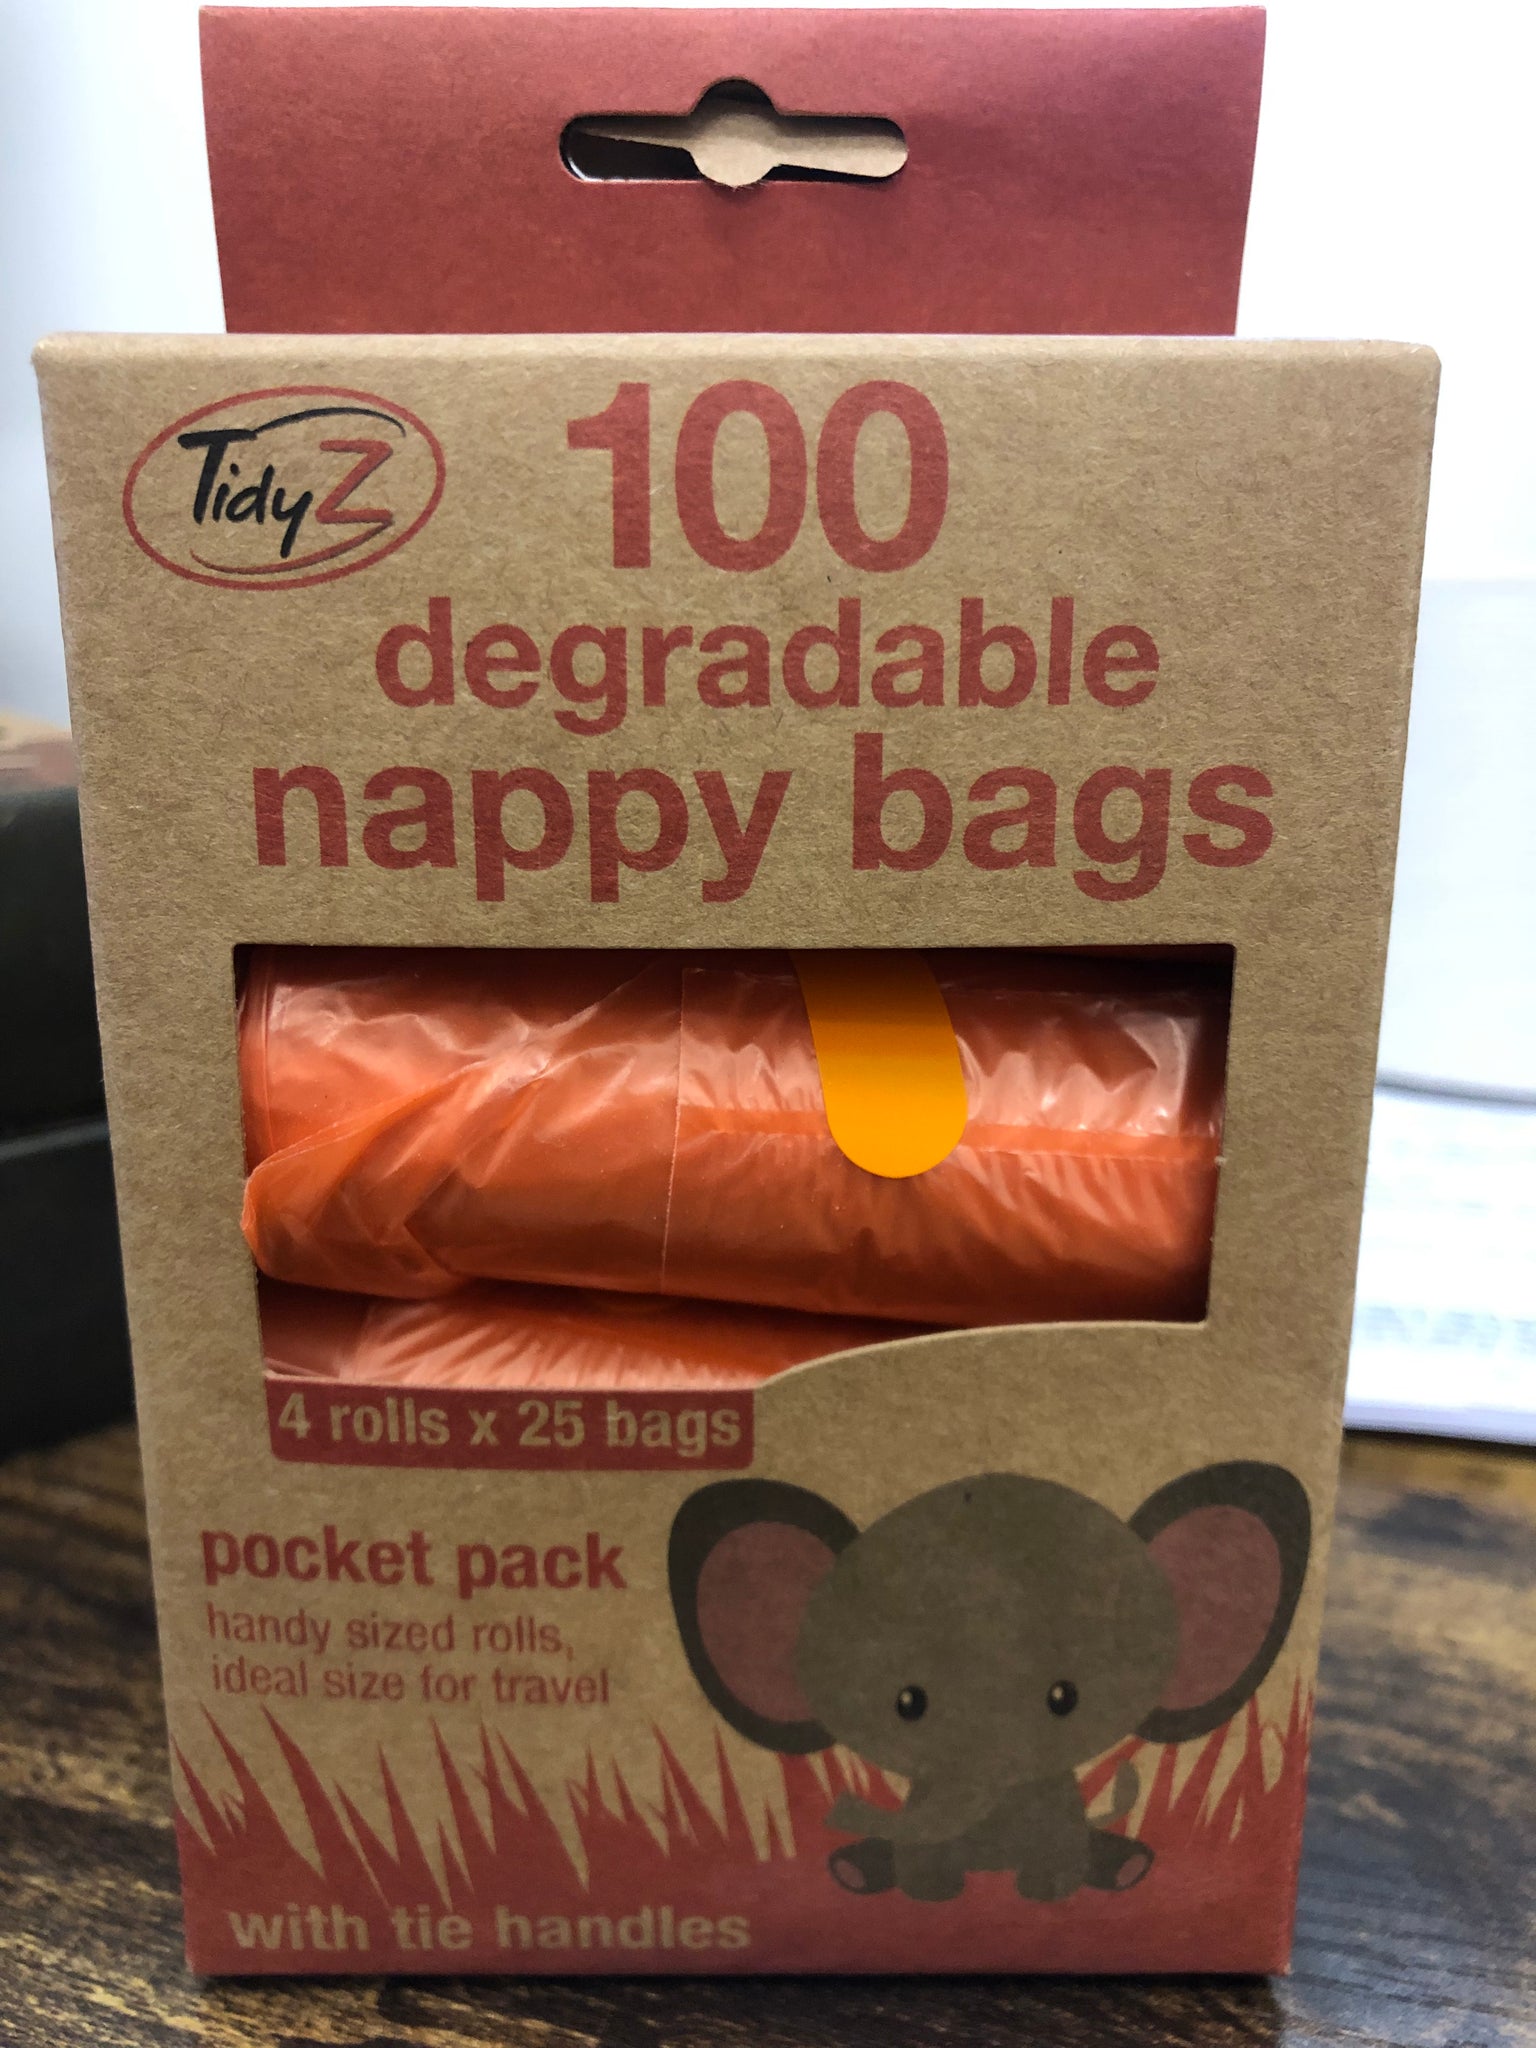 TidyZ Doggy Bags Degradable 100 Pack